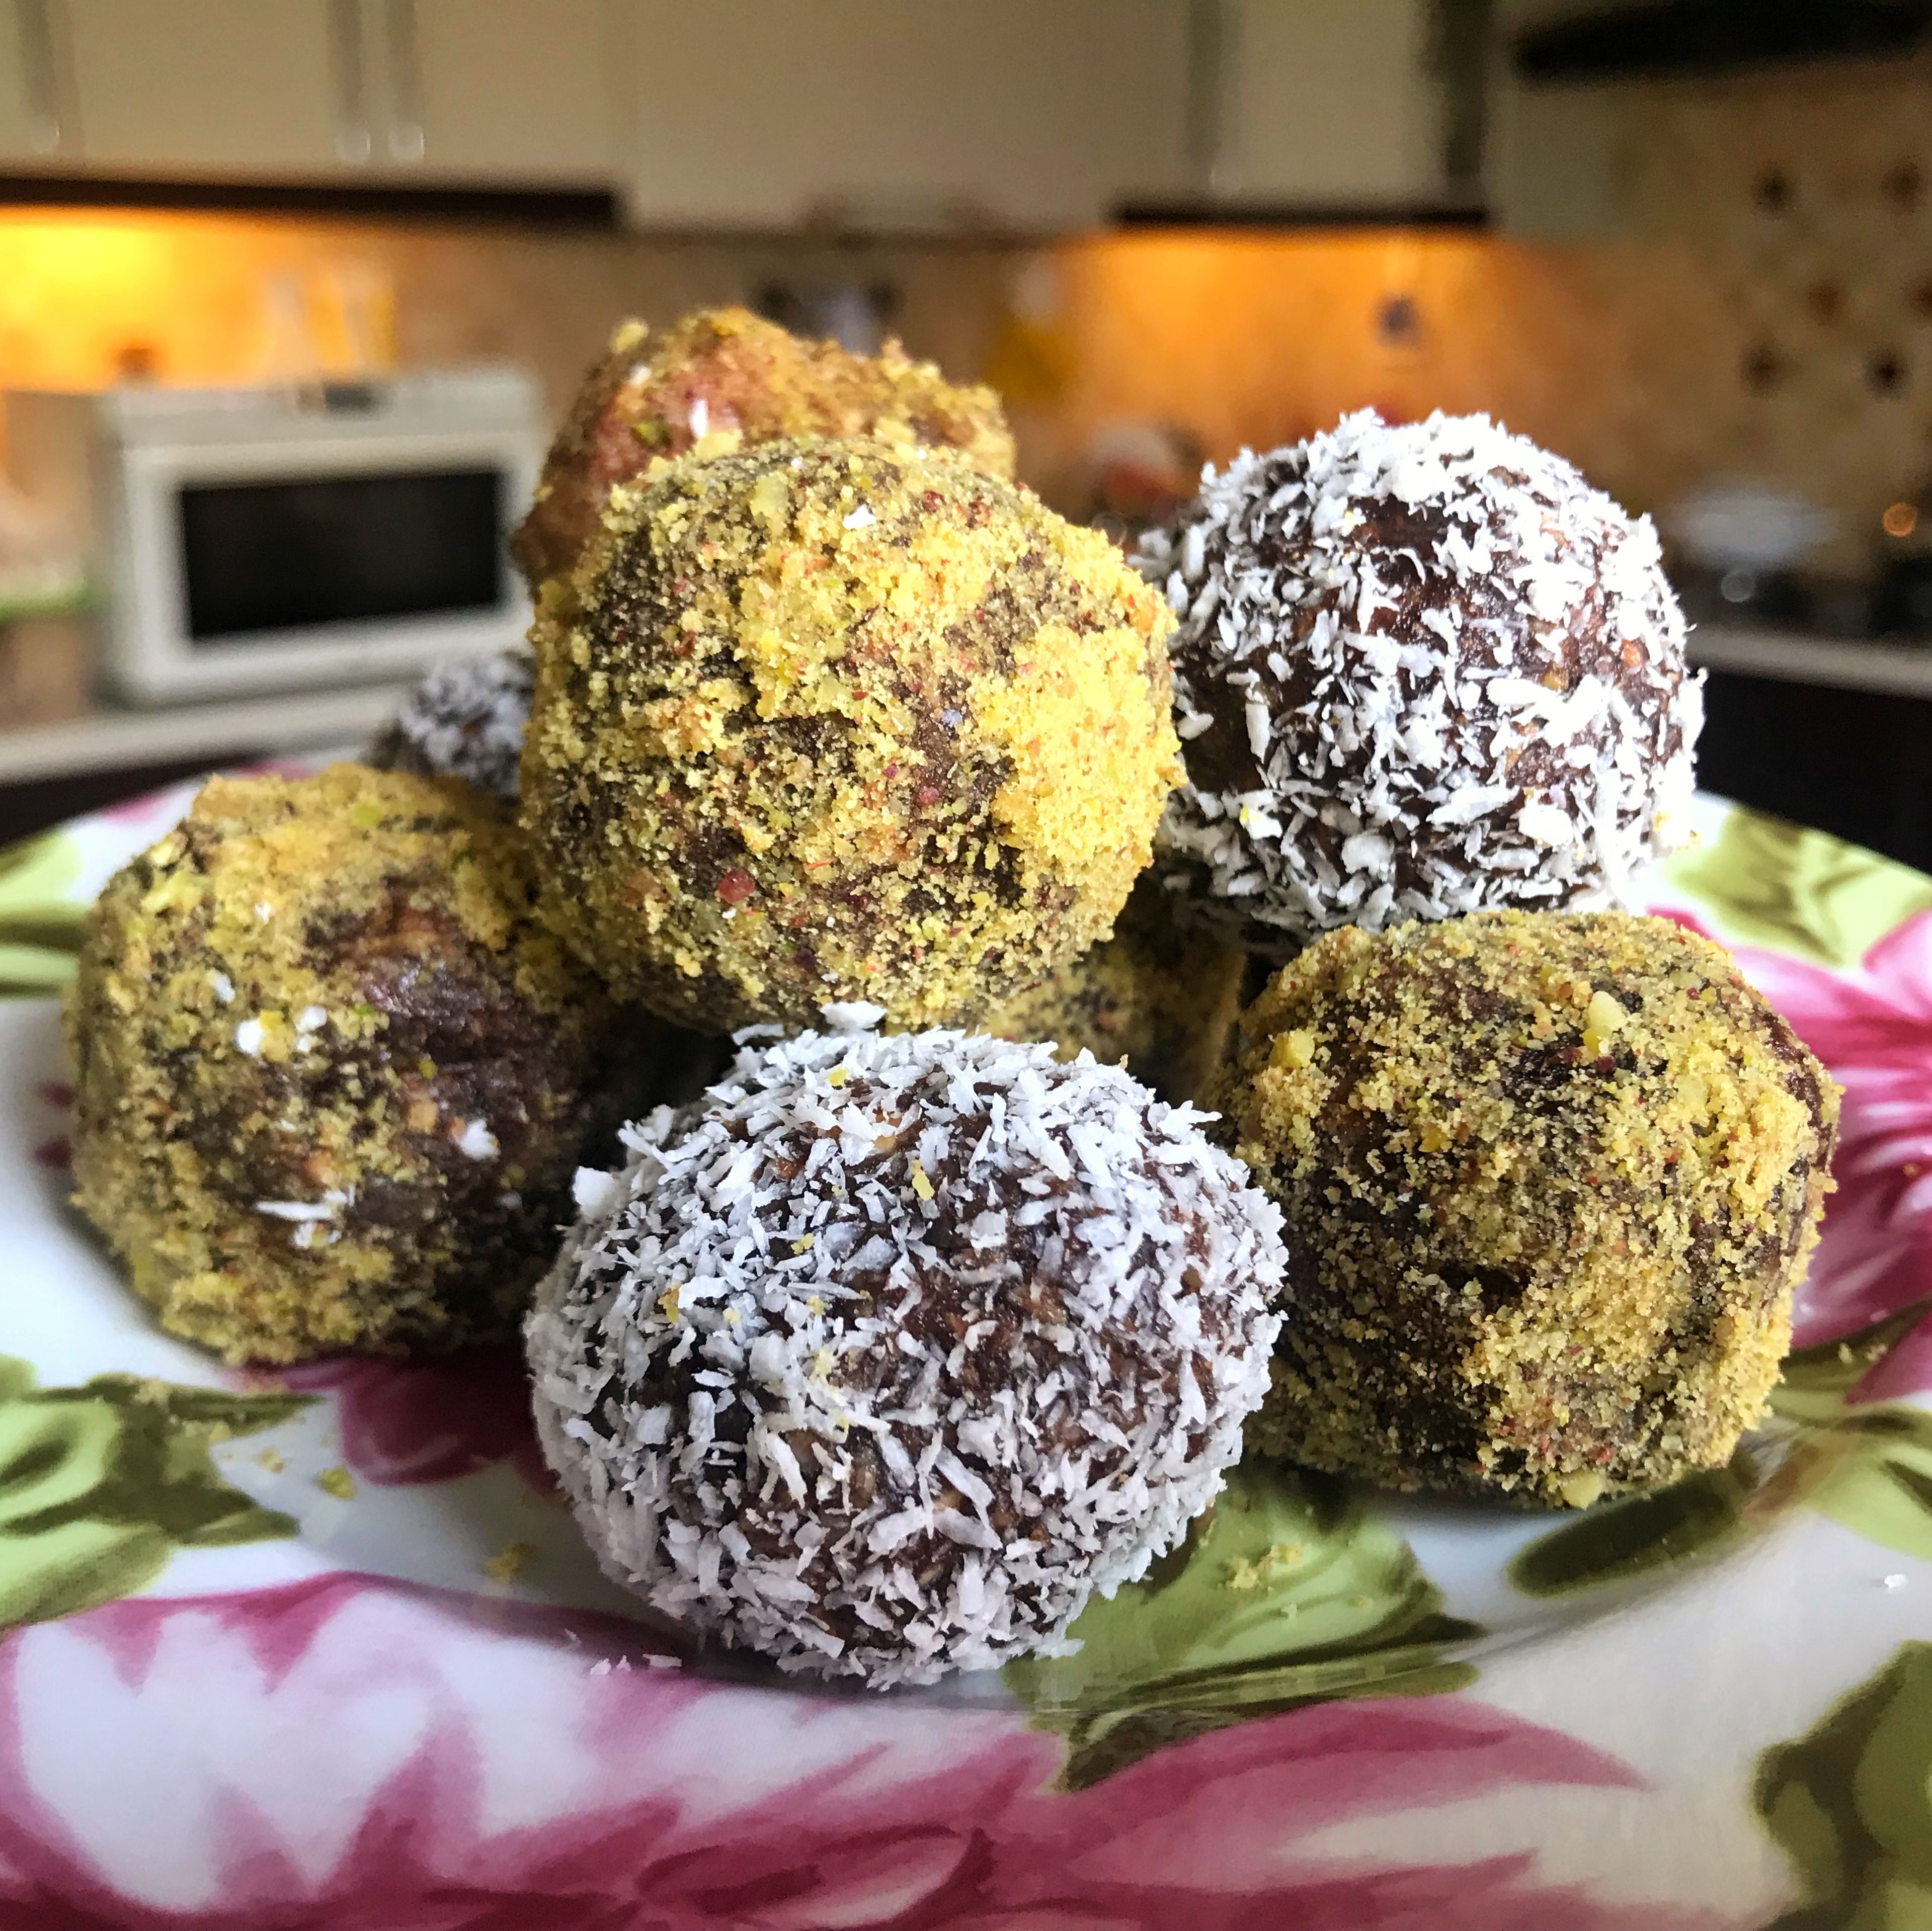 At the end make small or medium balls. Also you can roll them in coconut powder or pistachio powder.